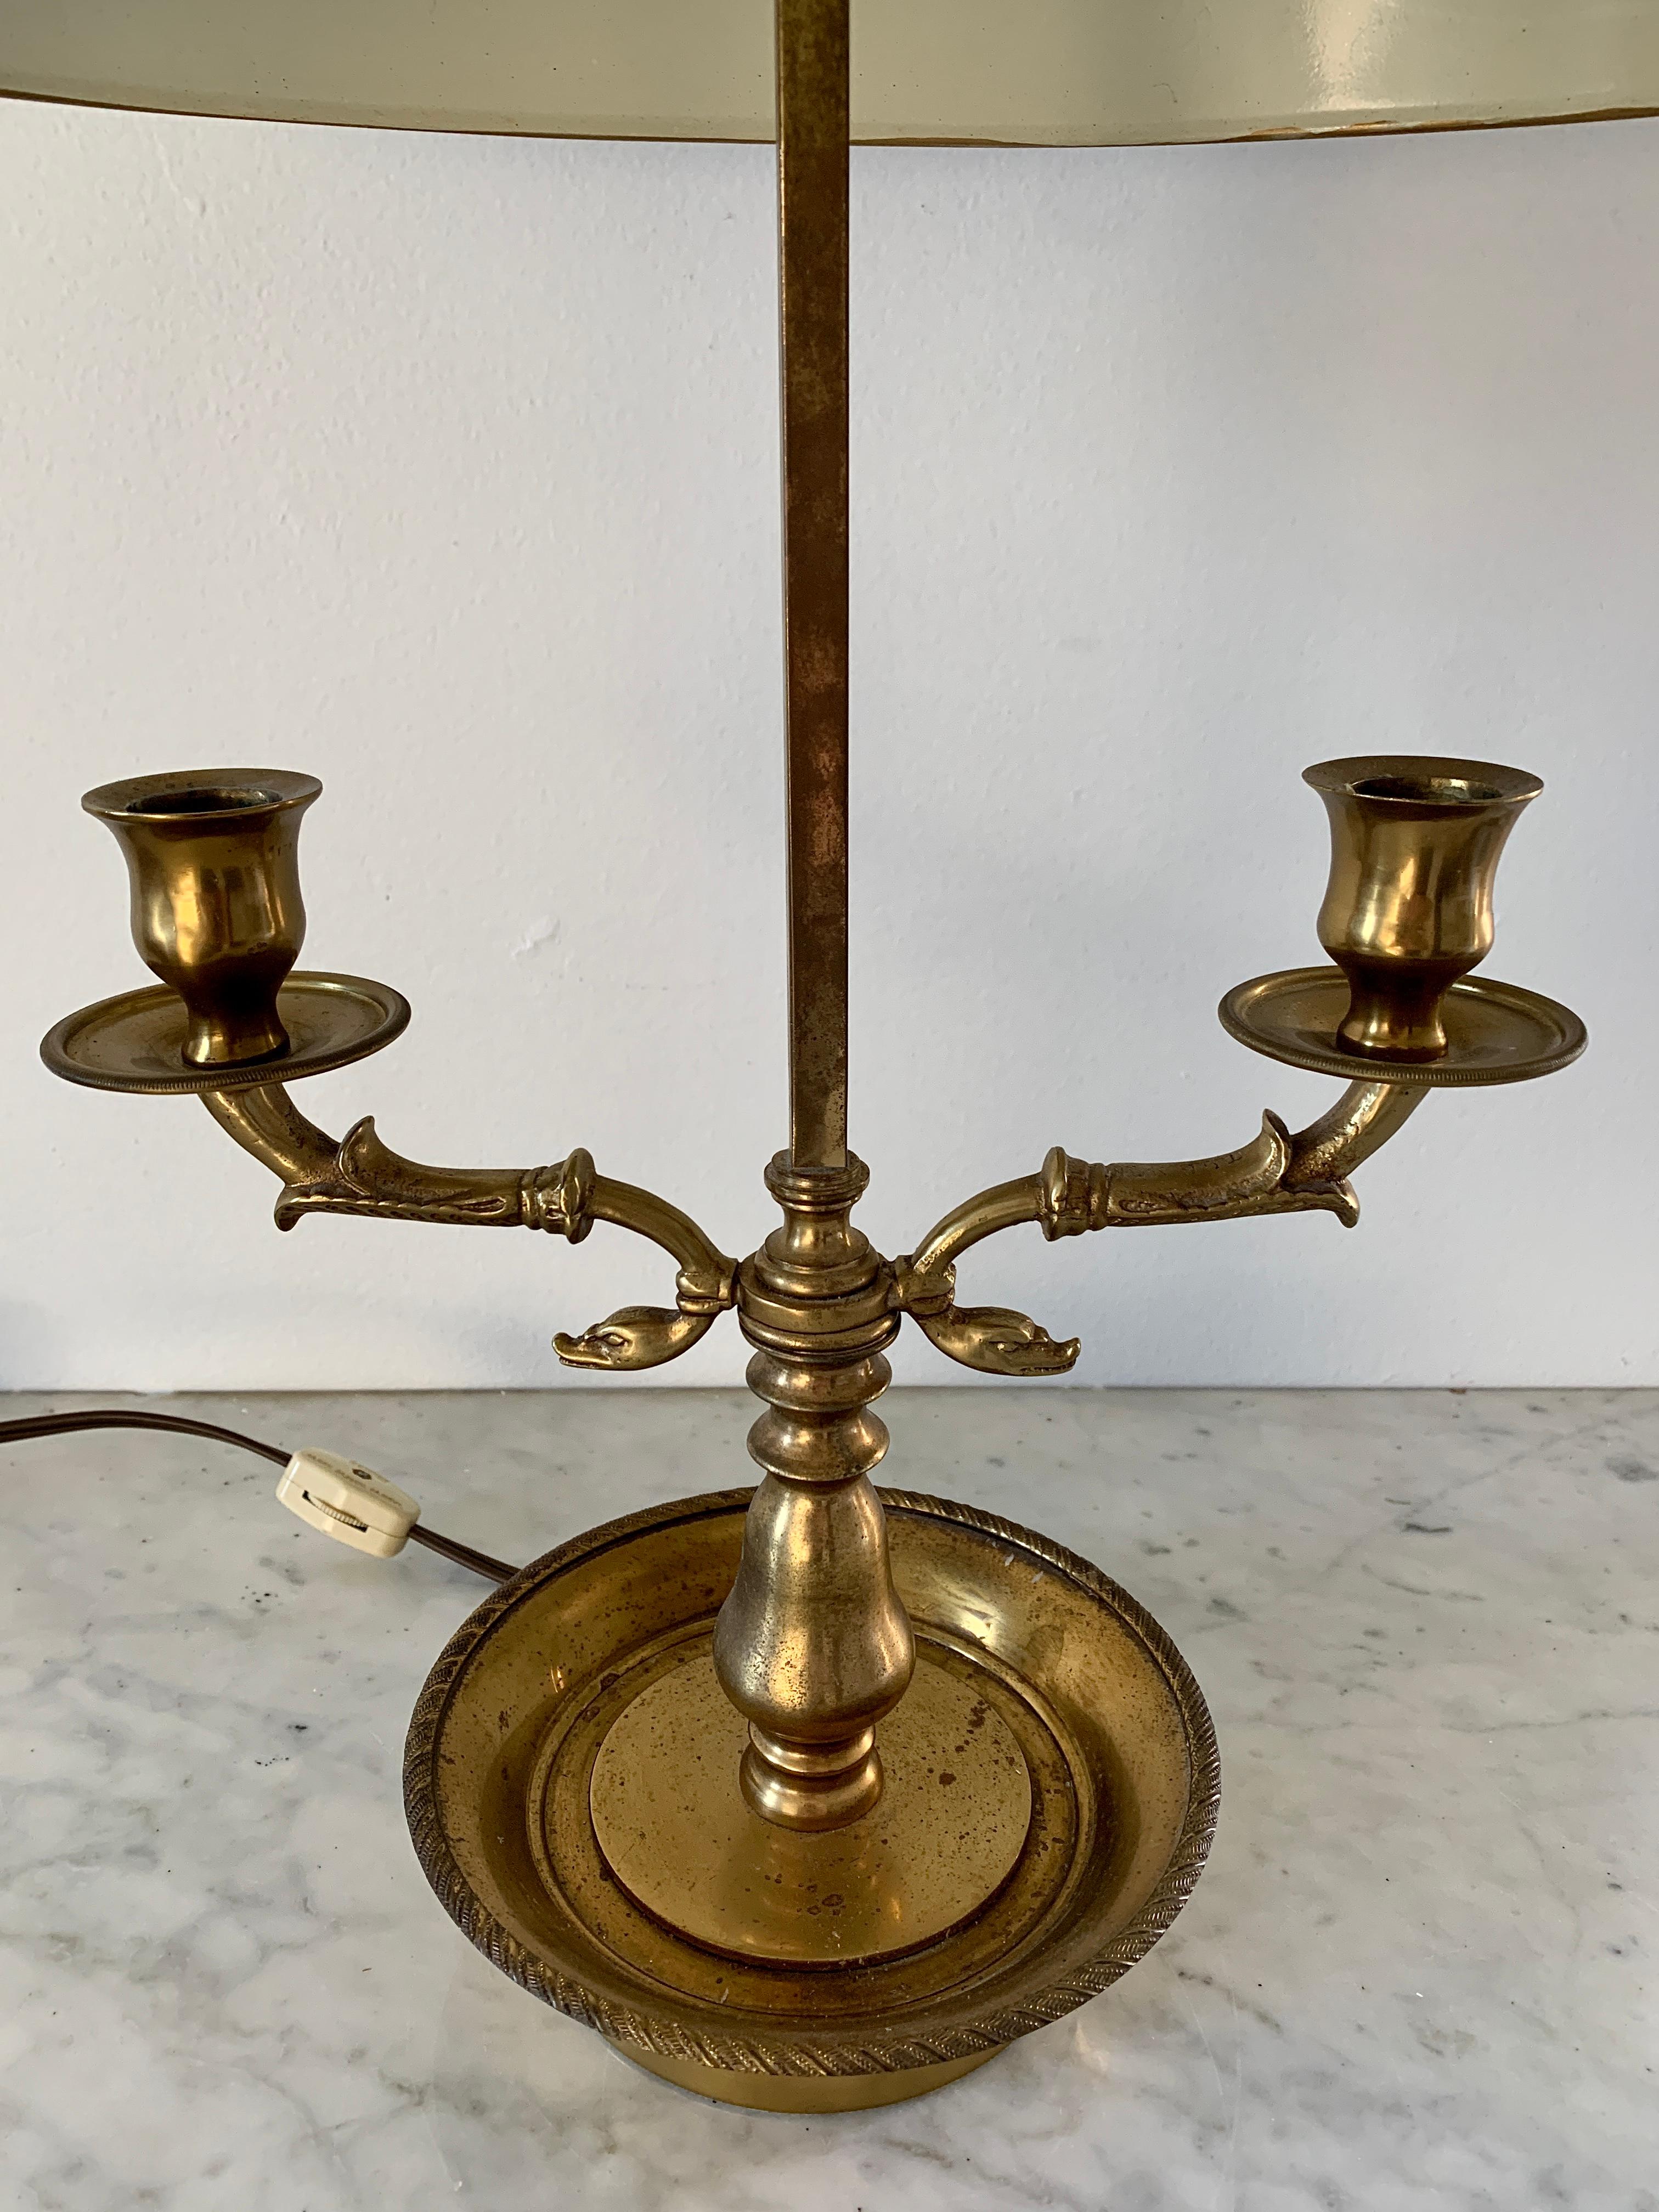 American Mid-20th Century Brass Bouillotte Double Dolphin Lamp with Black Tole Shade For Sale